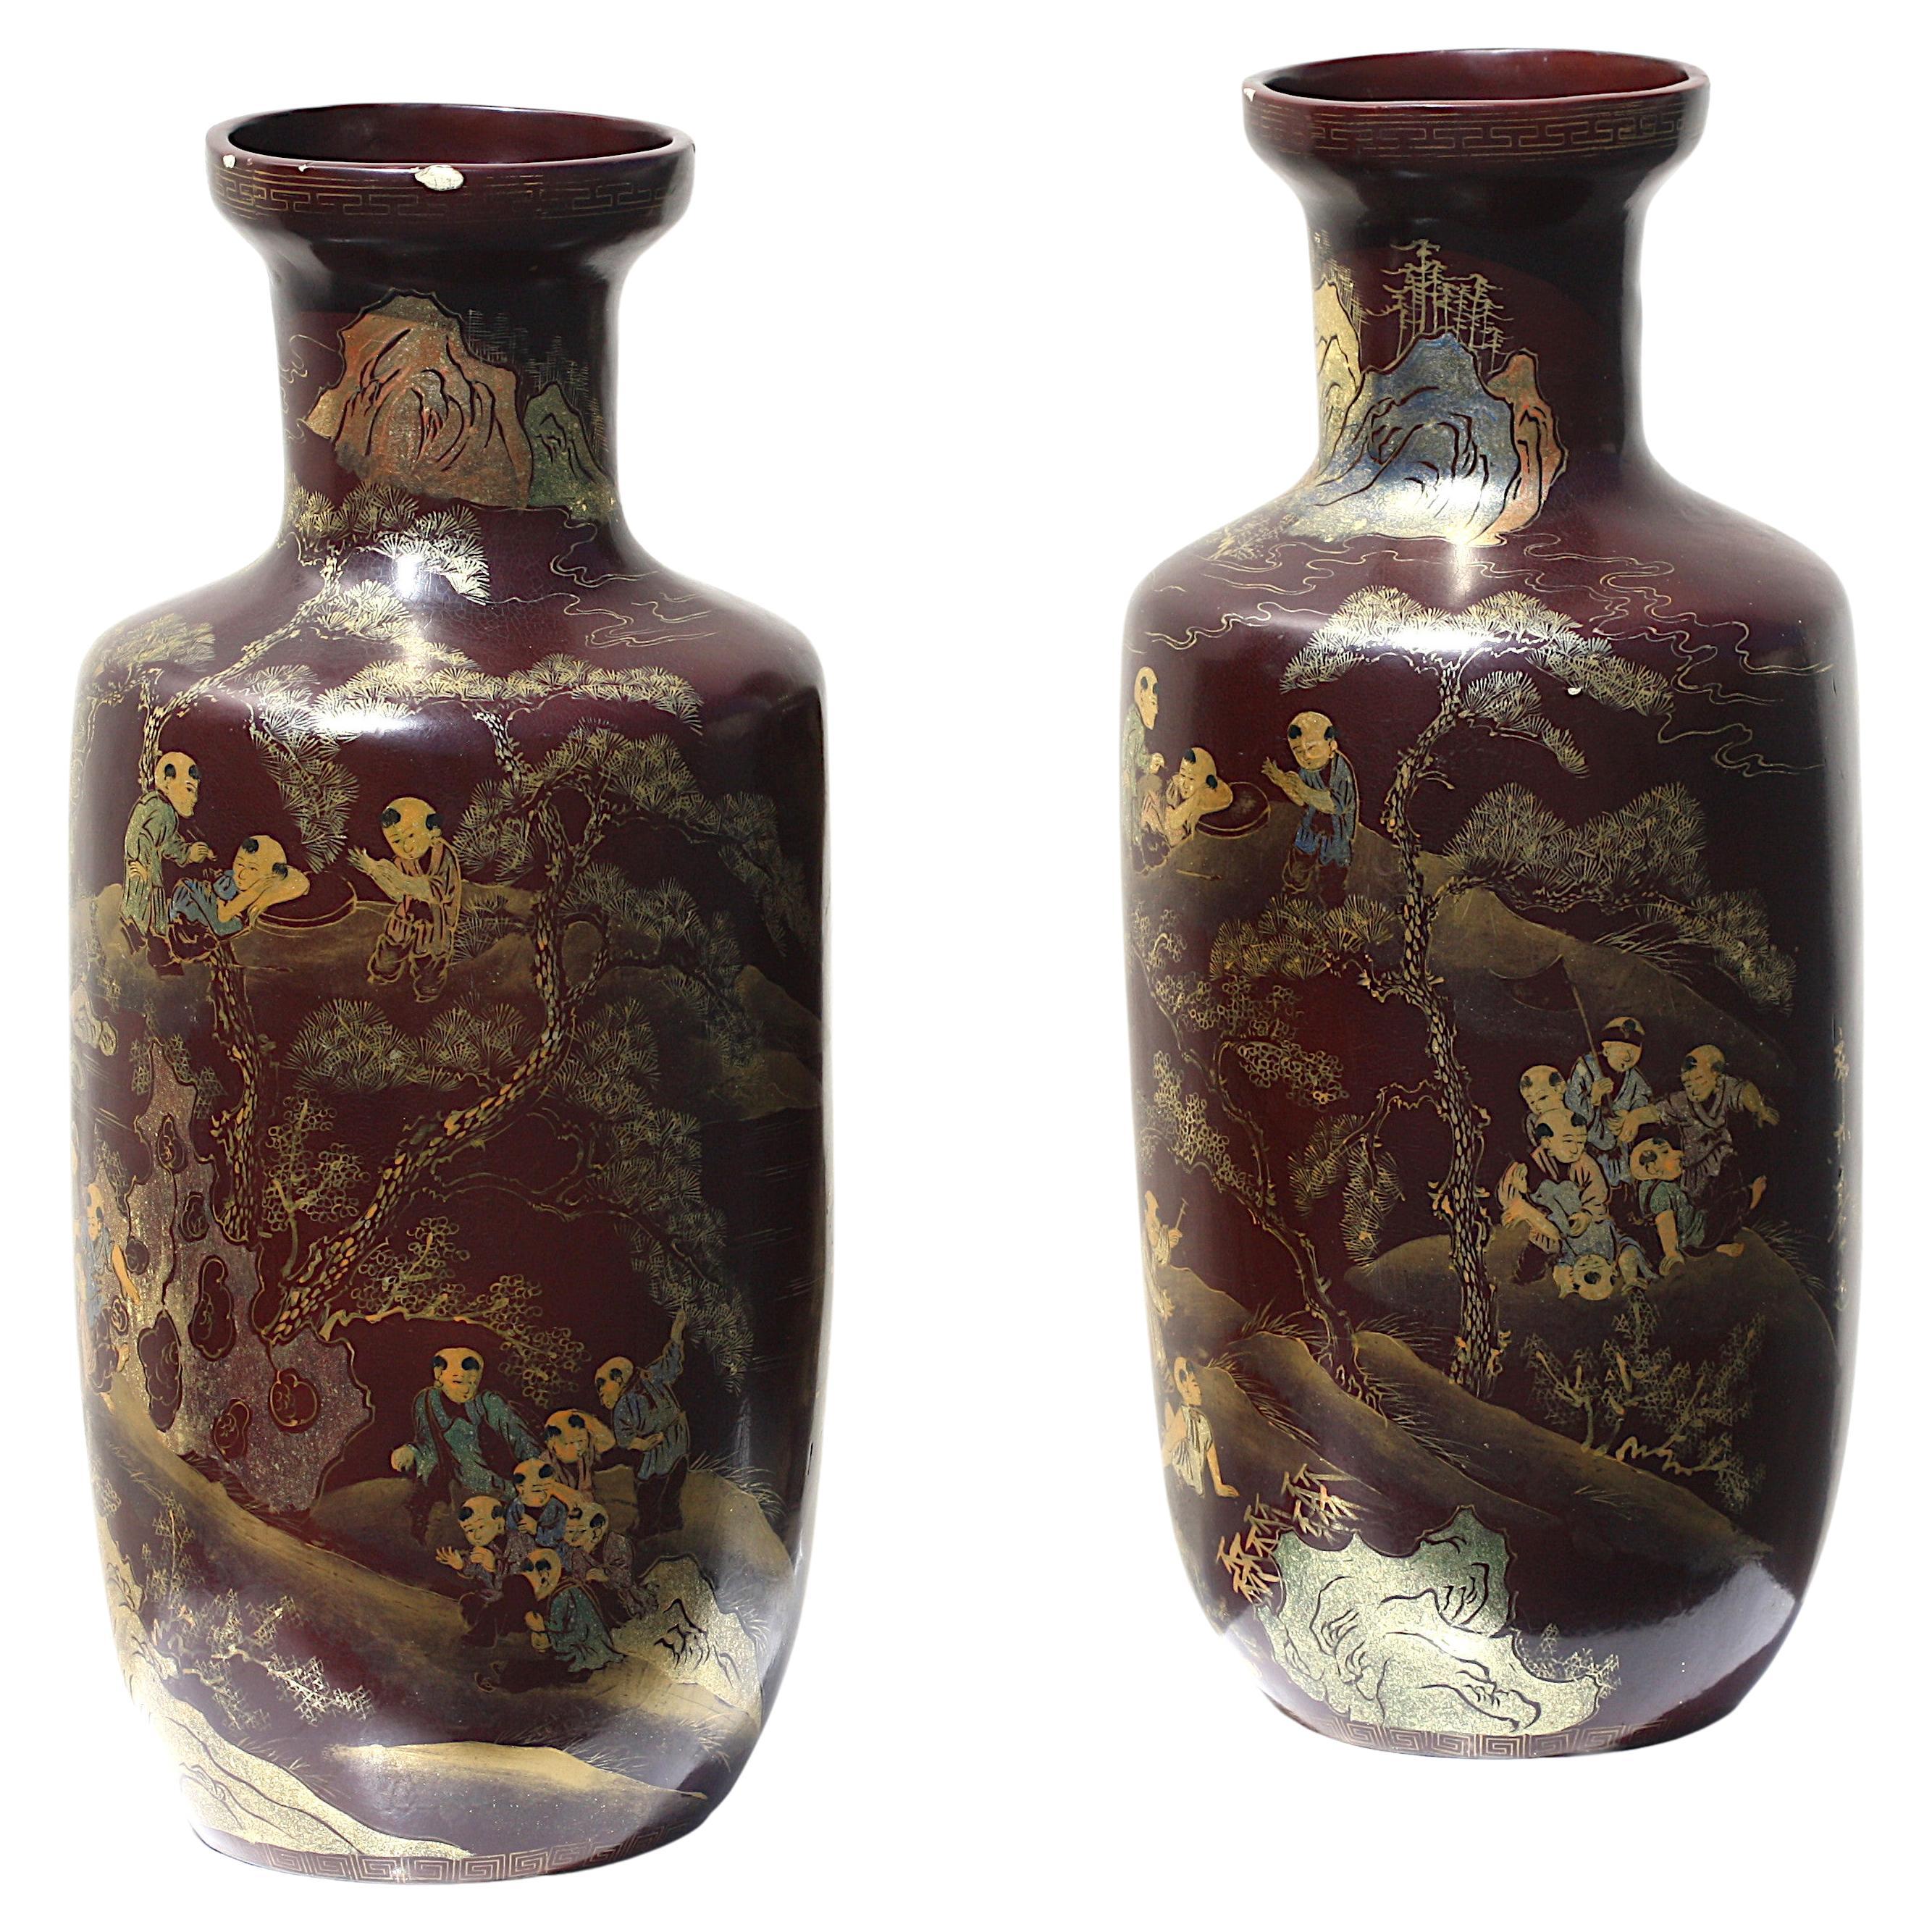 Pair of Chinese Export Vases of Black Lacquer with Gold Gilt Decoration